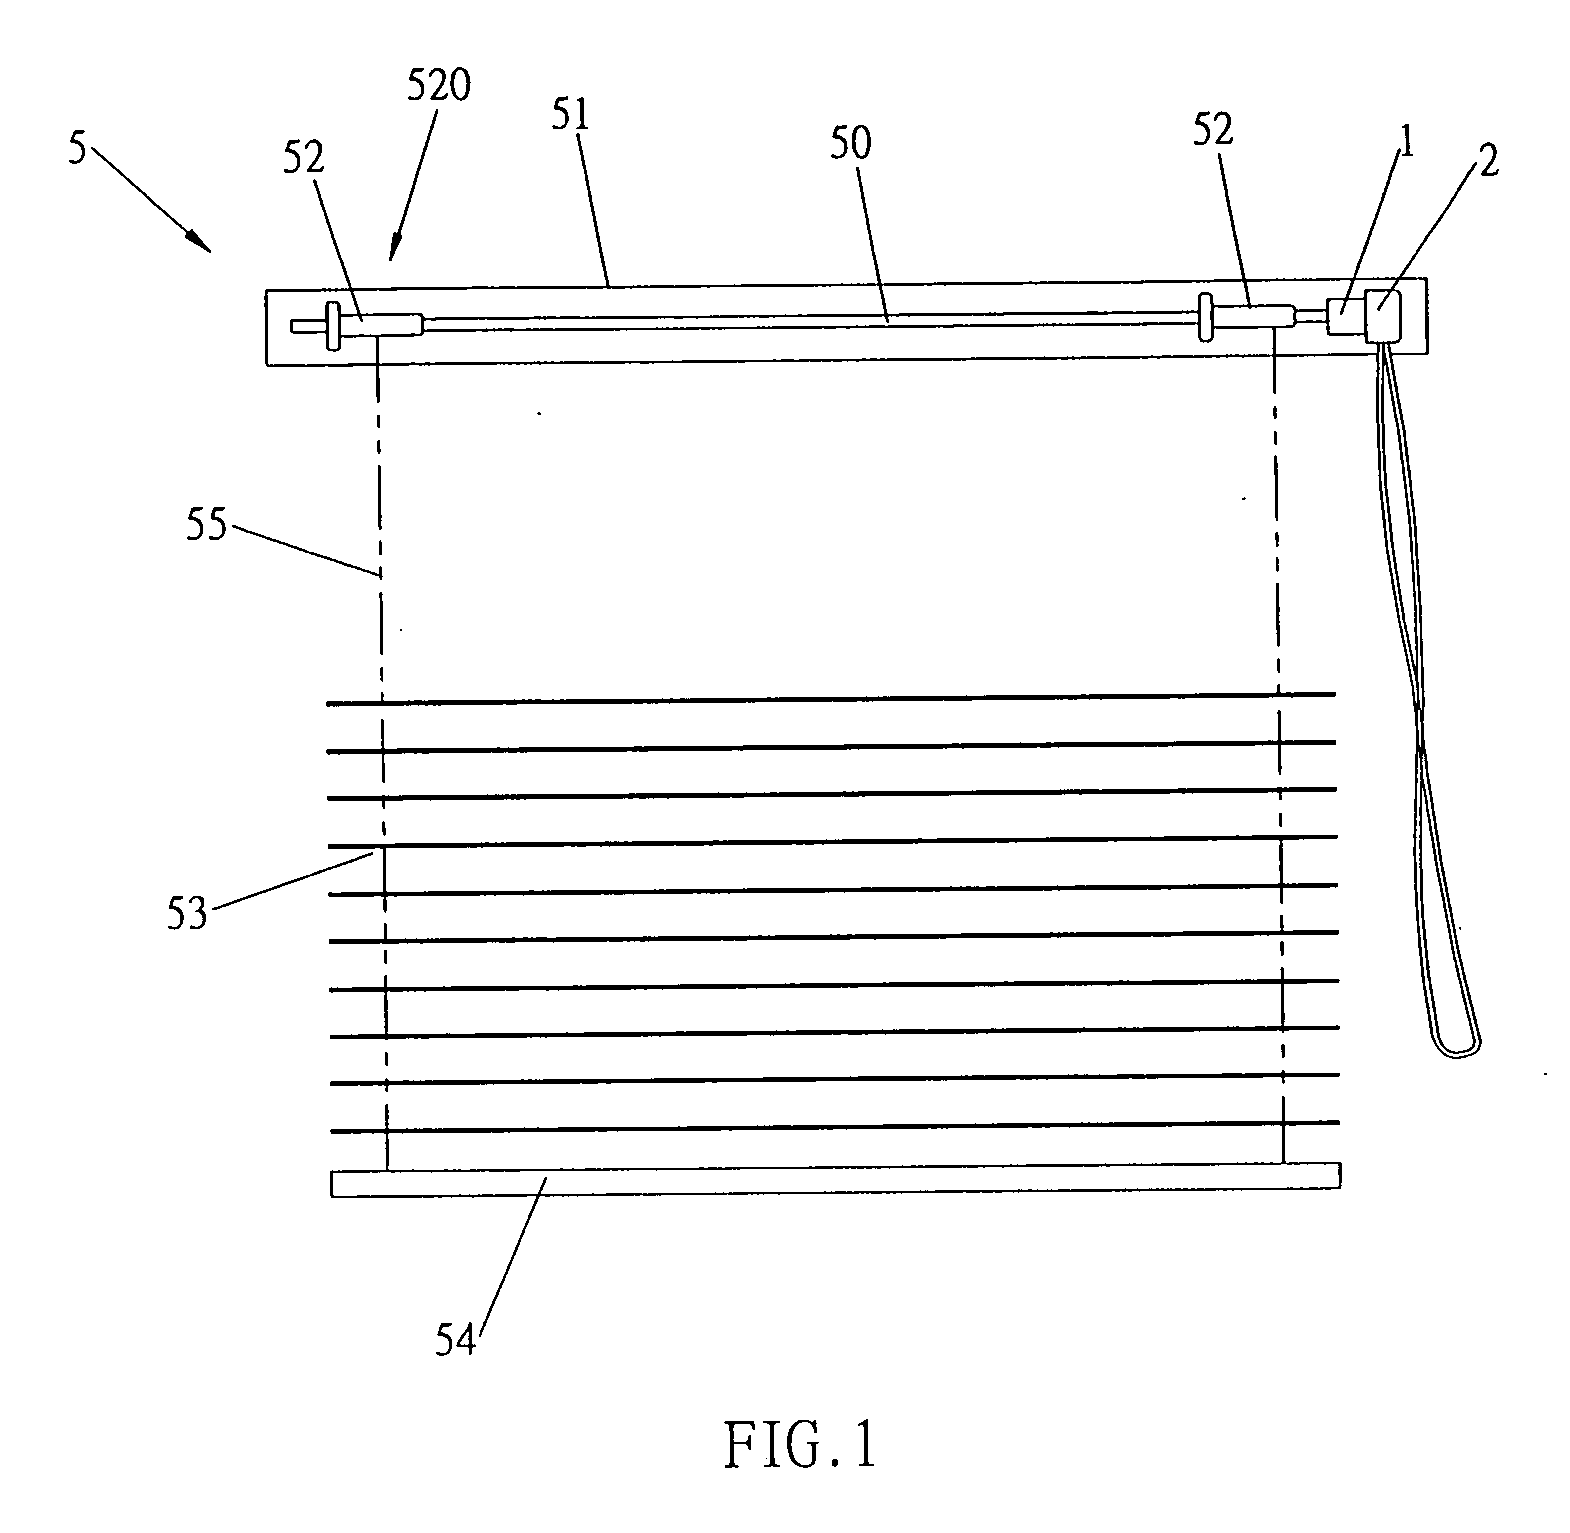 Brake mechanism for curtain linkage system